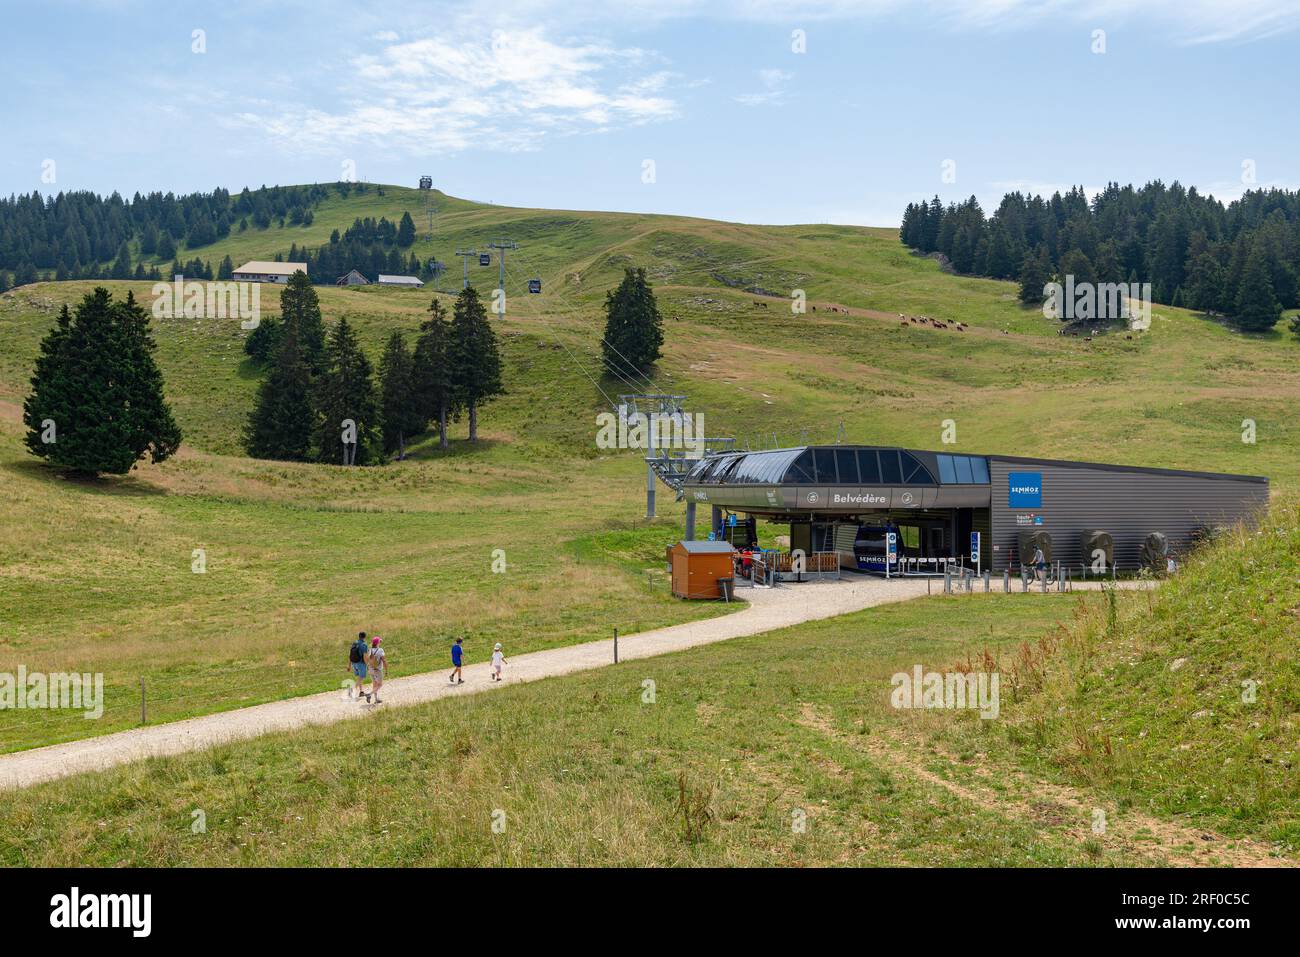 Telemix cable car station in the summer, an easy way to reach the top of the Semnoz resort, a mountain in the Haute-Savoie department in France. Stock Photo